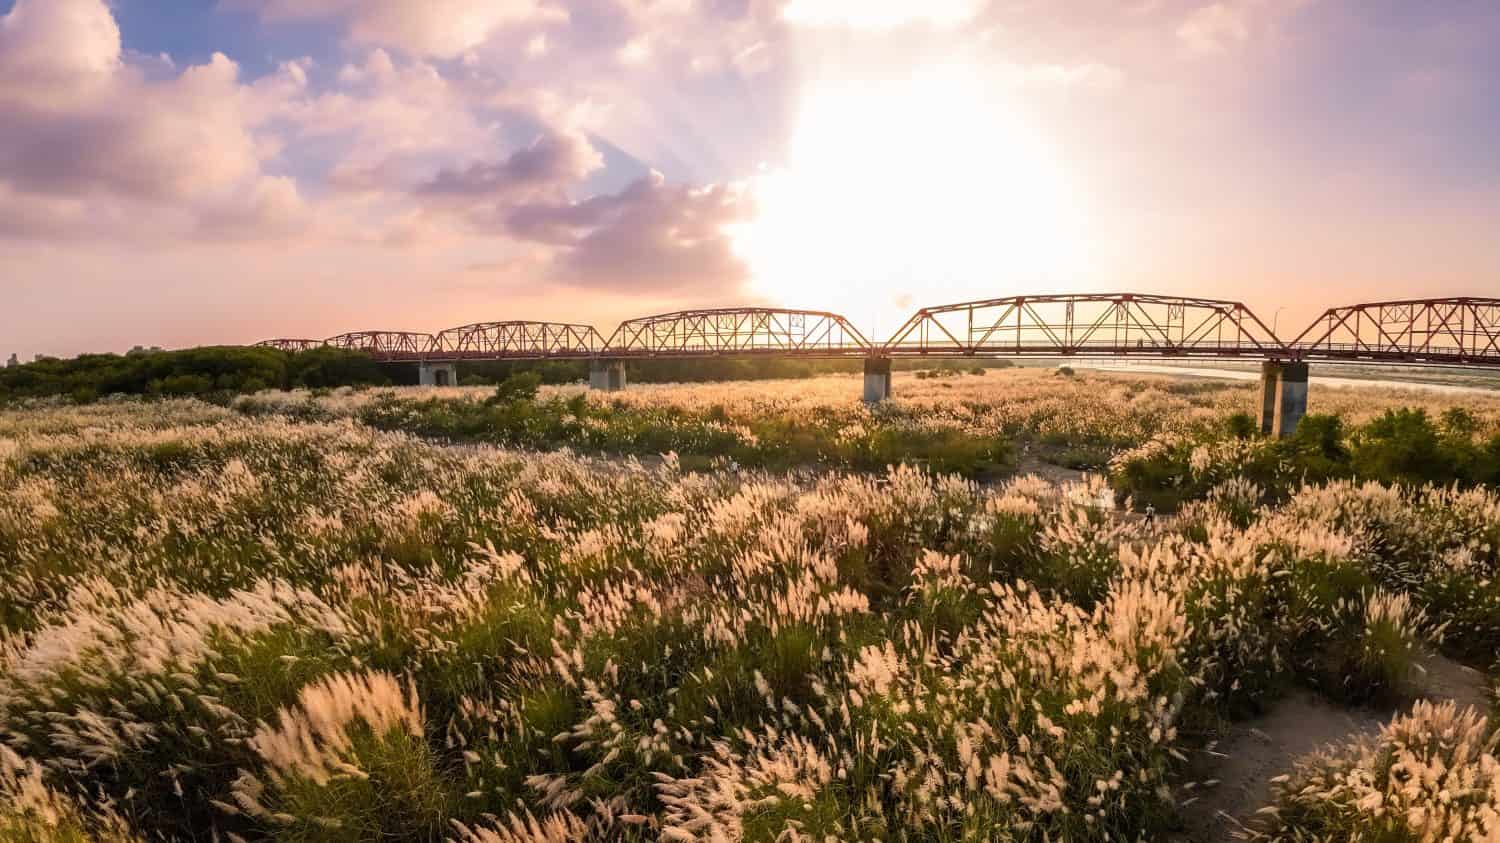 A serene view of Xiluo Bridge in Yuanlin Town, Taiwan, adorned with Sweet Root Grass under a sunset glow.